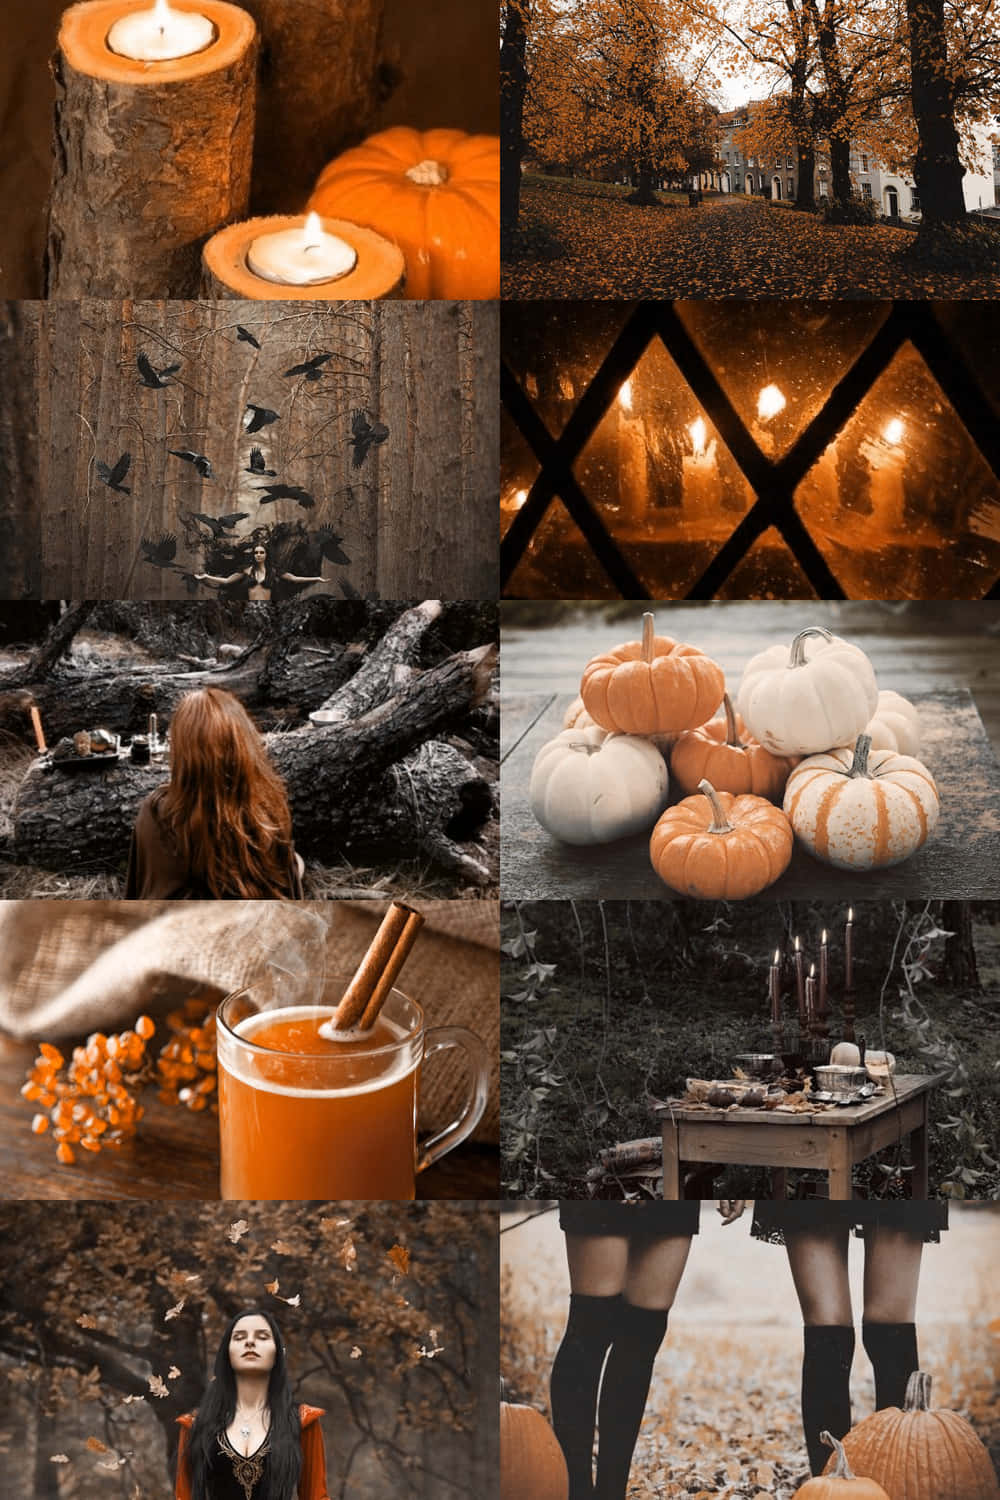 A Collage Of Pictures Of Pumpkins And Candles